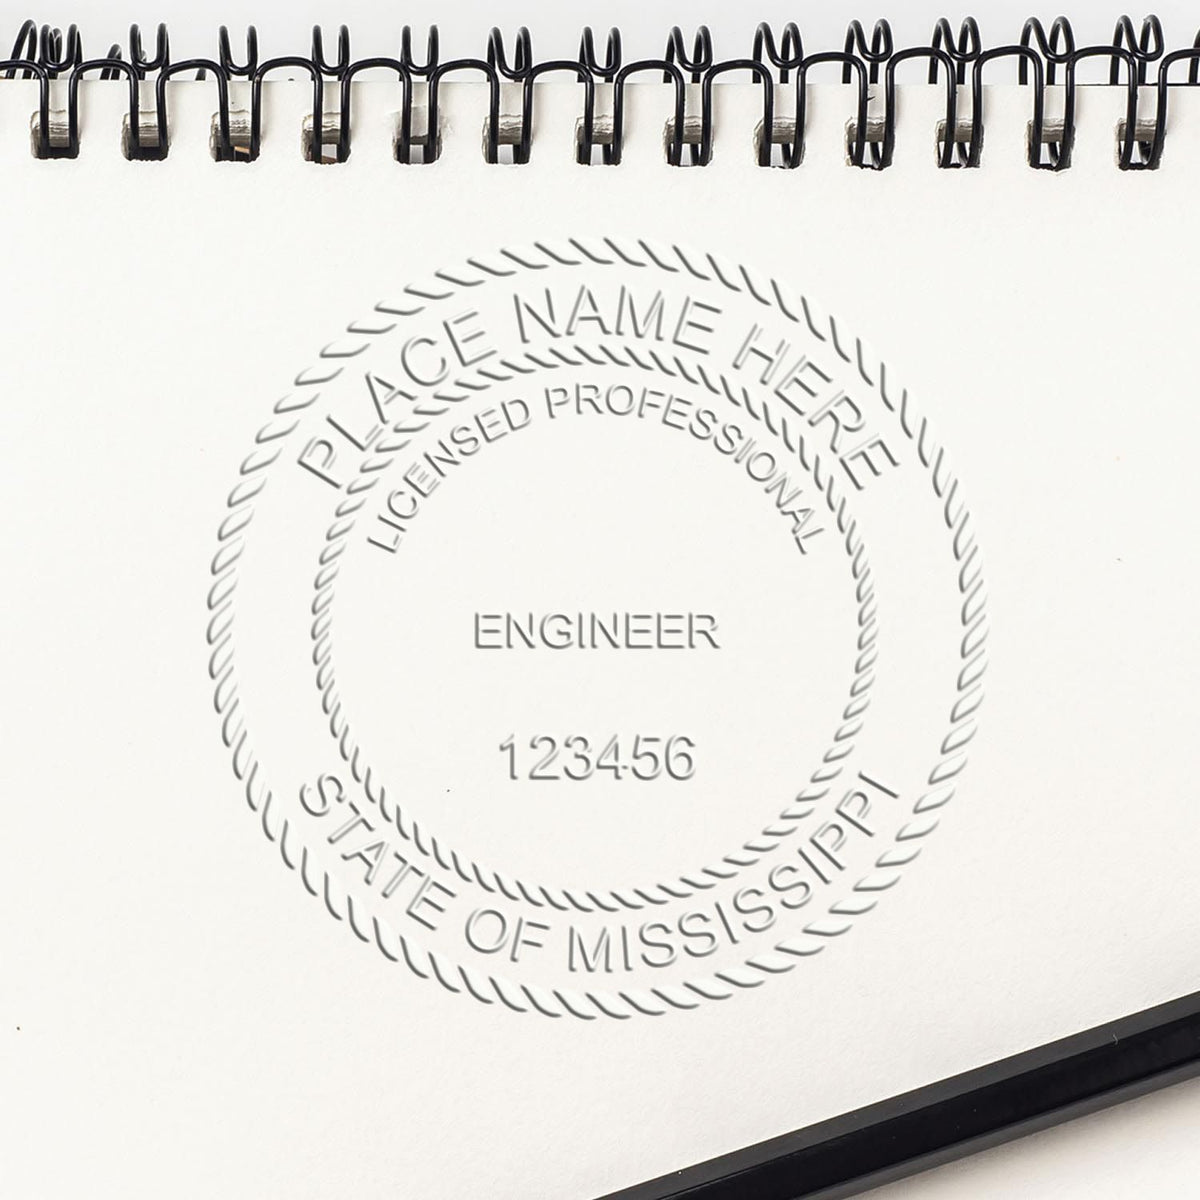 A stamped impression of the Soft Mississippi Professional Engineer Seal in this stylish lifestyle photo, setting the tone for a unique and personalized product.